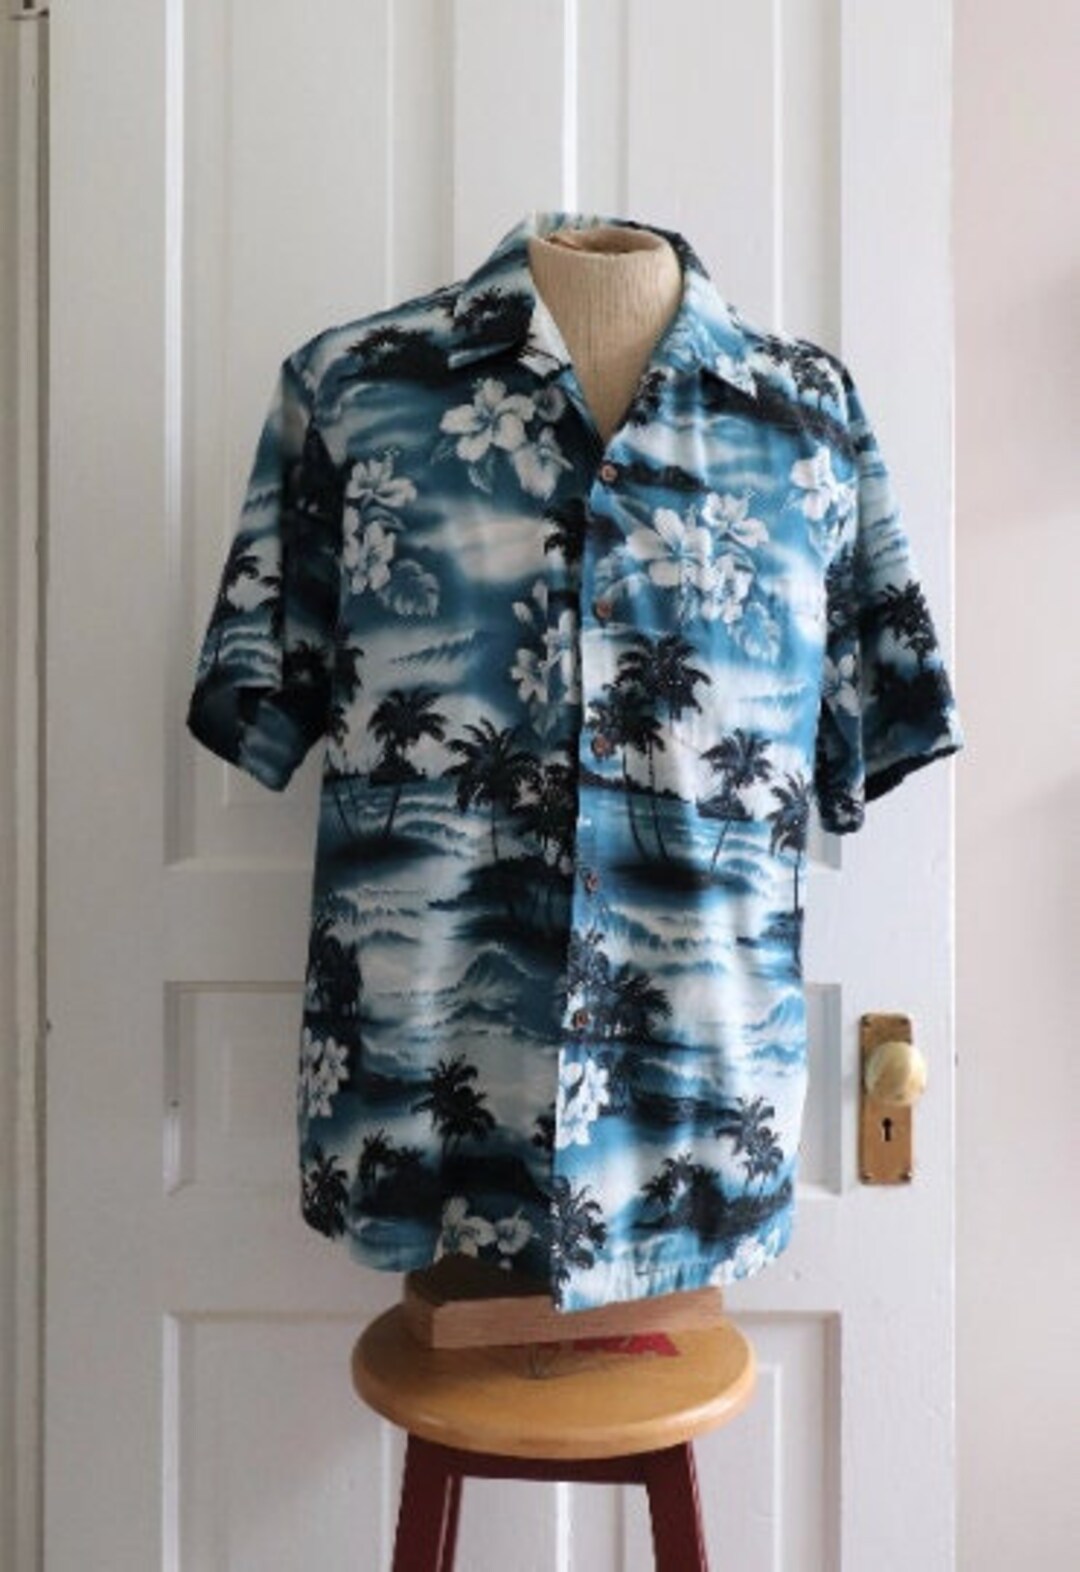 Vintage Hawaiian Shirt with Flowers - Tapestry - Size 18